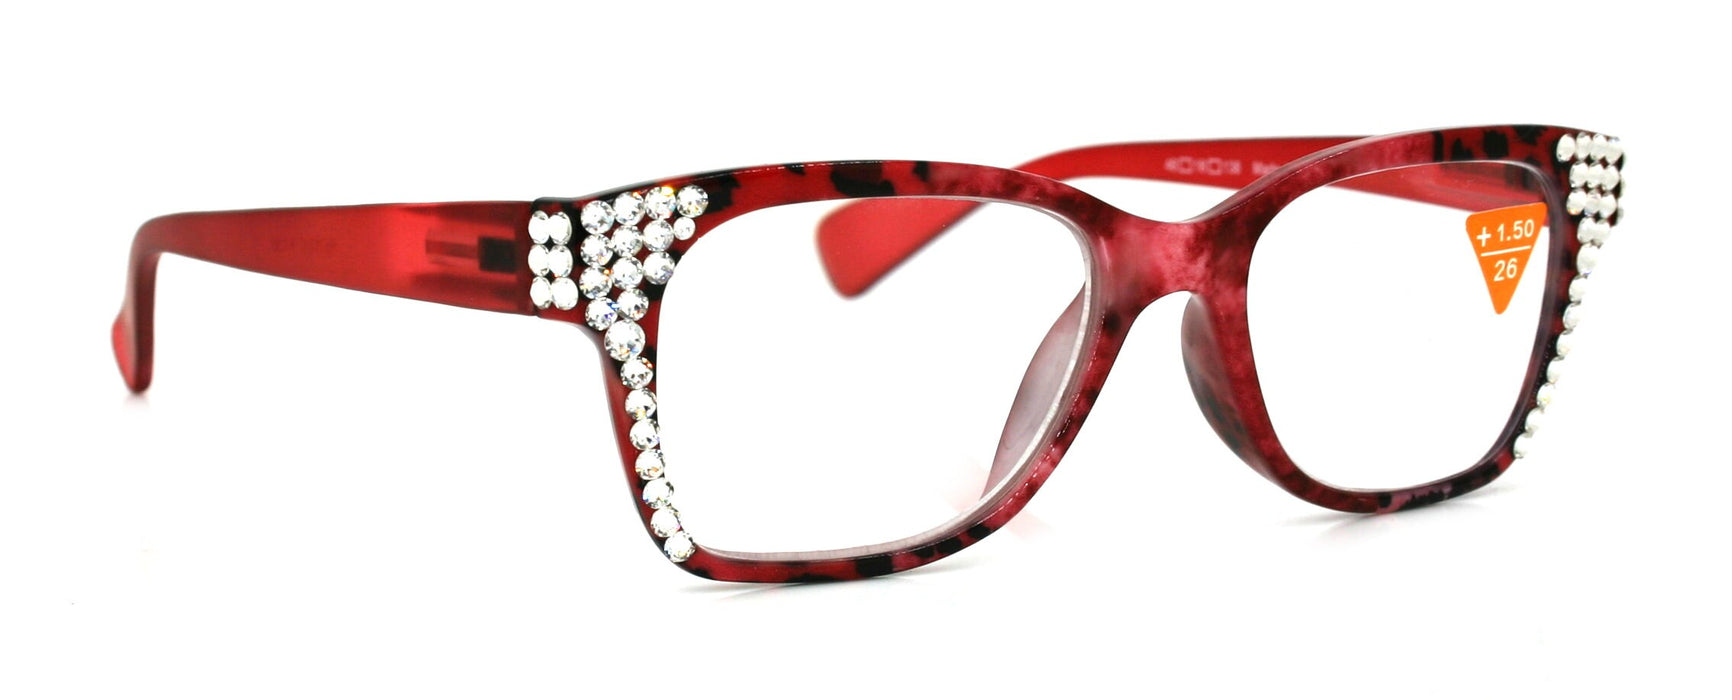 The Bohemian, (Bling) ReadingGlasses 4 Women w (Clear)Genuine European Crystals.+1.25+4 (Black nRed Tortoise shell) Square, NY Fifth Avenue.